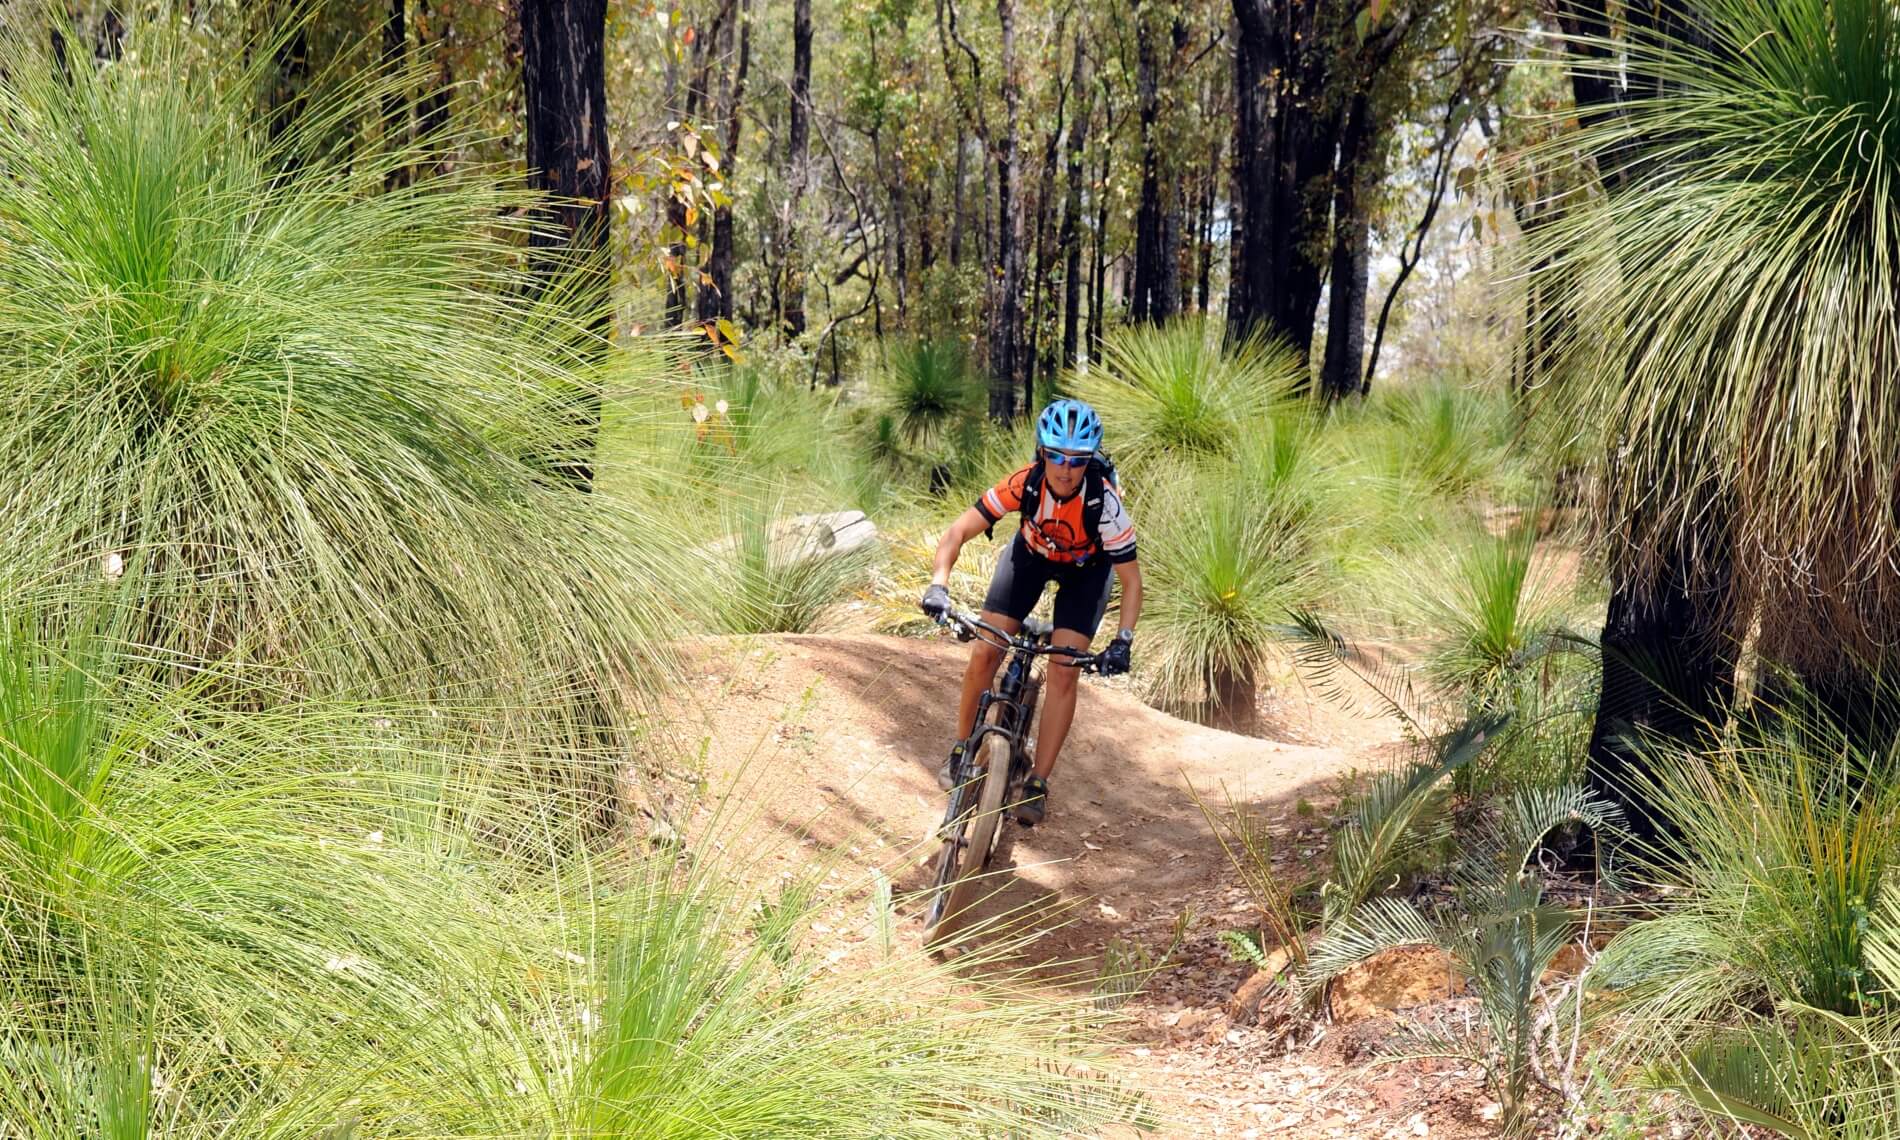 A mountain biker coming around a corner on a mountain bike trail surrounded by grass trees and other native trees